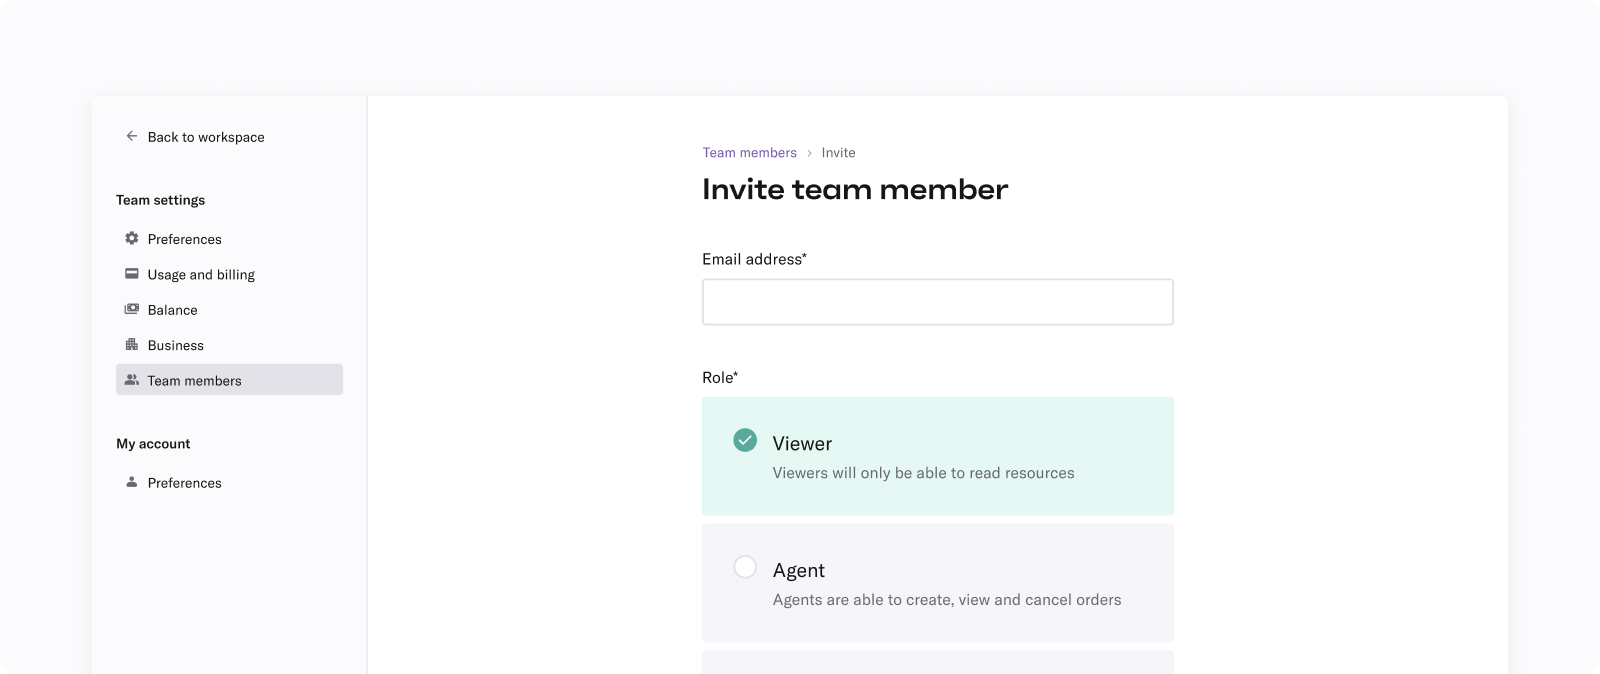 Partial screenshot of the Duffel dashboard invite team member page